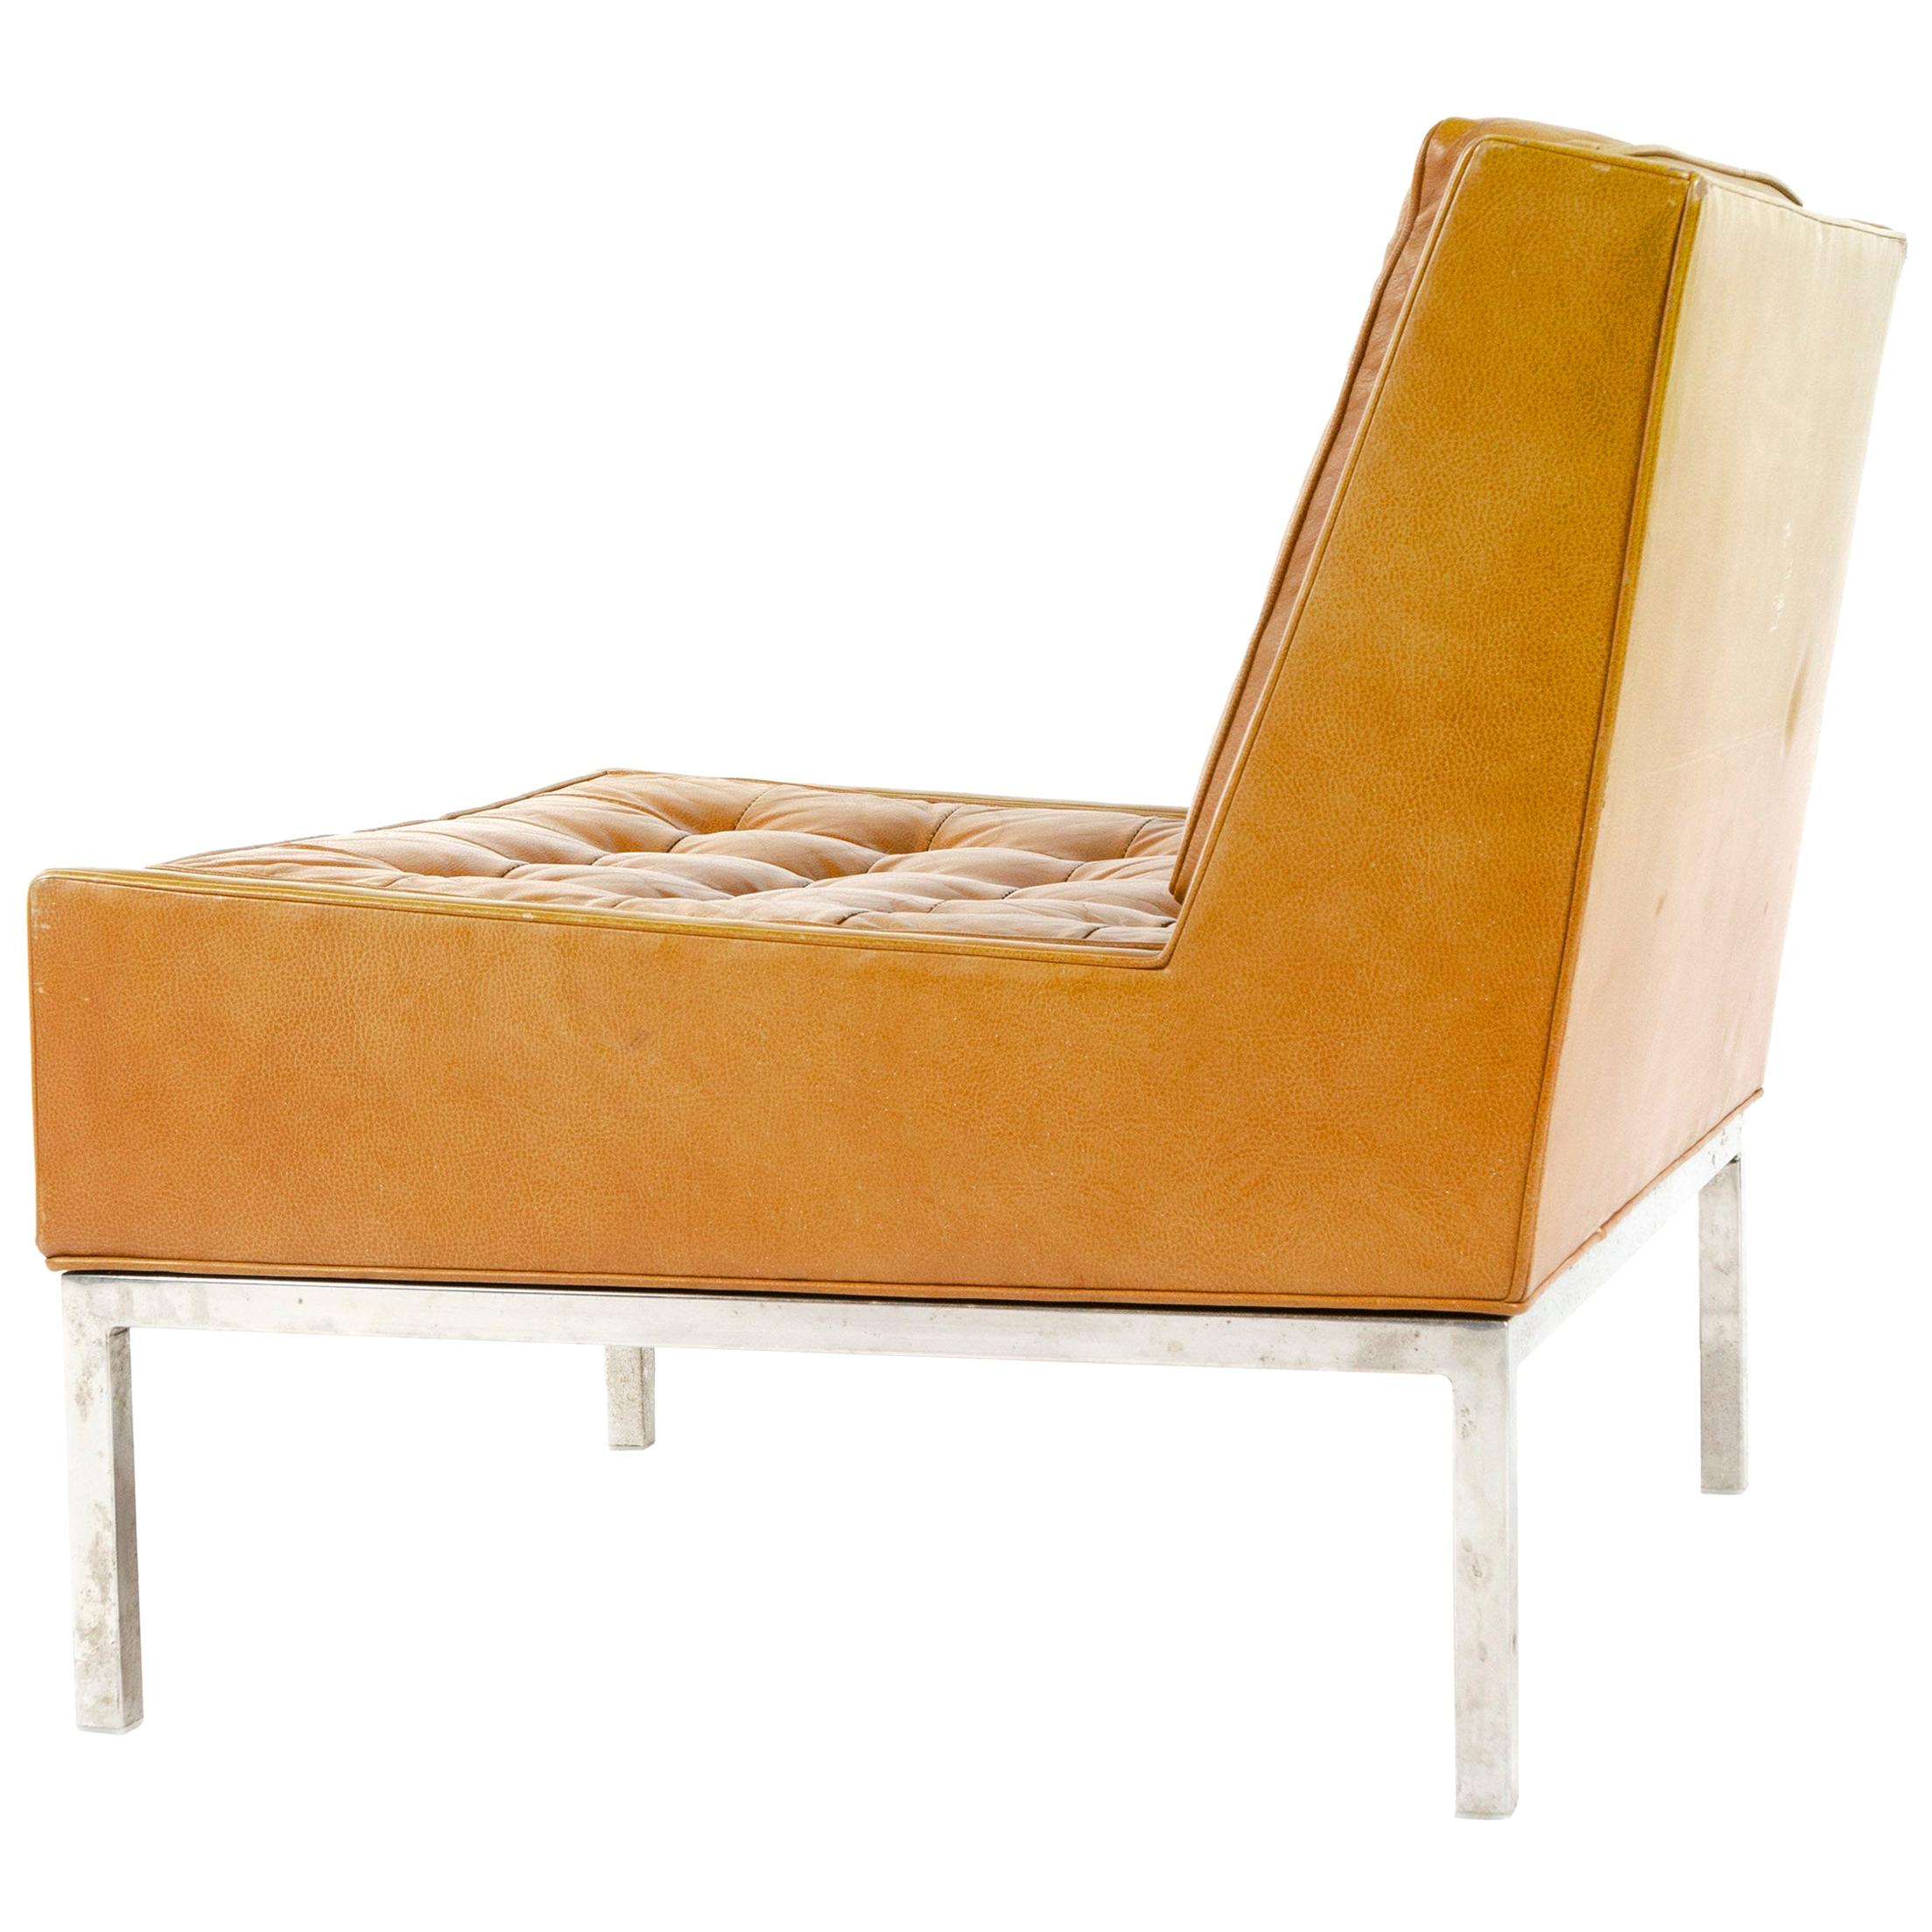 1960s Leather Lounge Chair by Edward Wormley for Dunbar For Sale